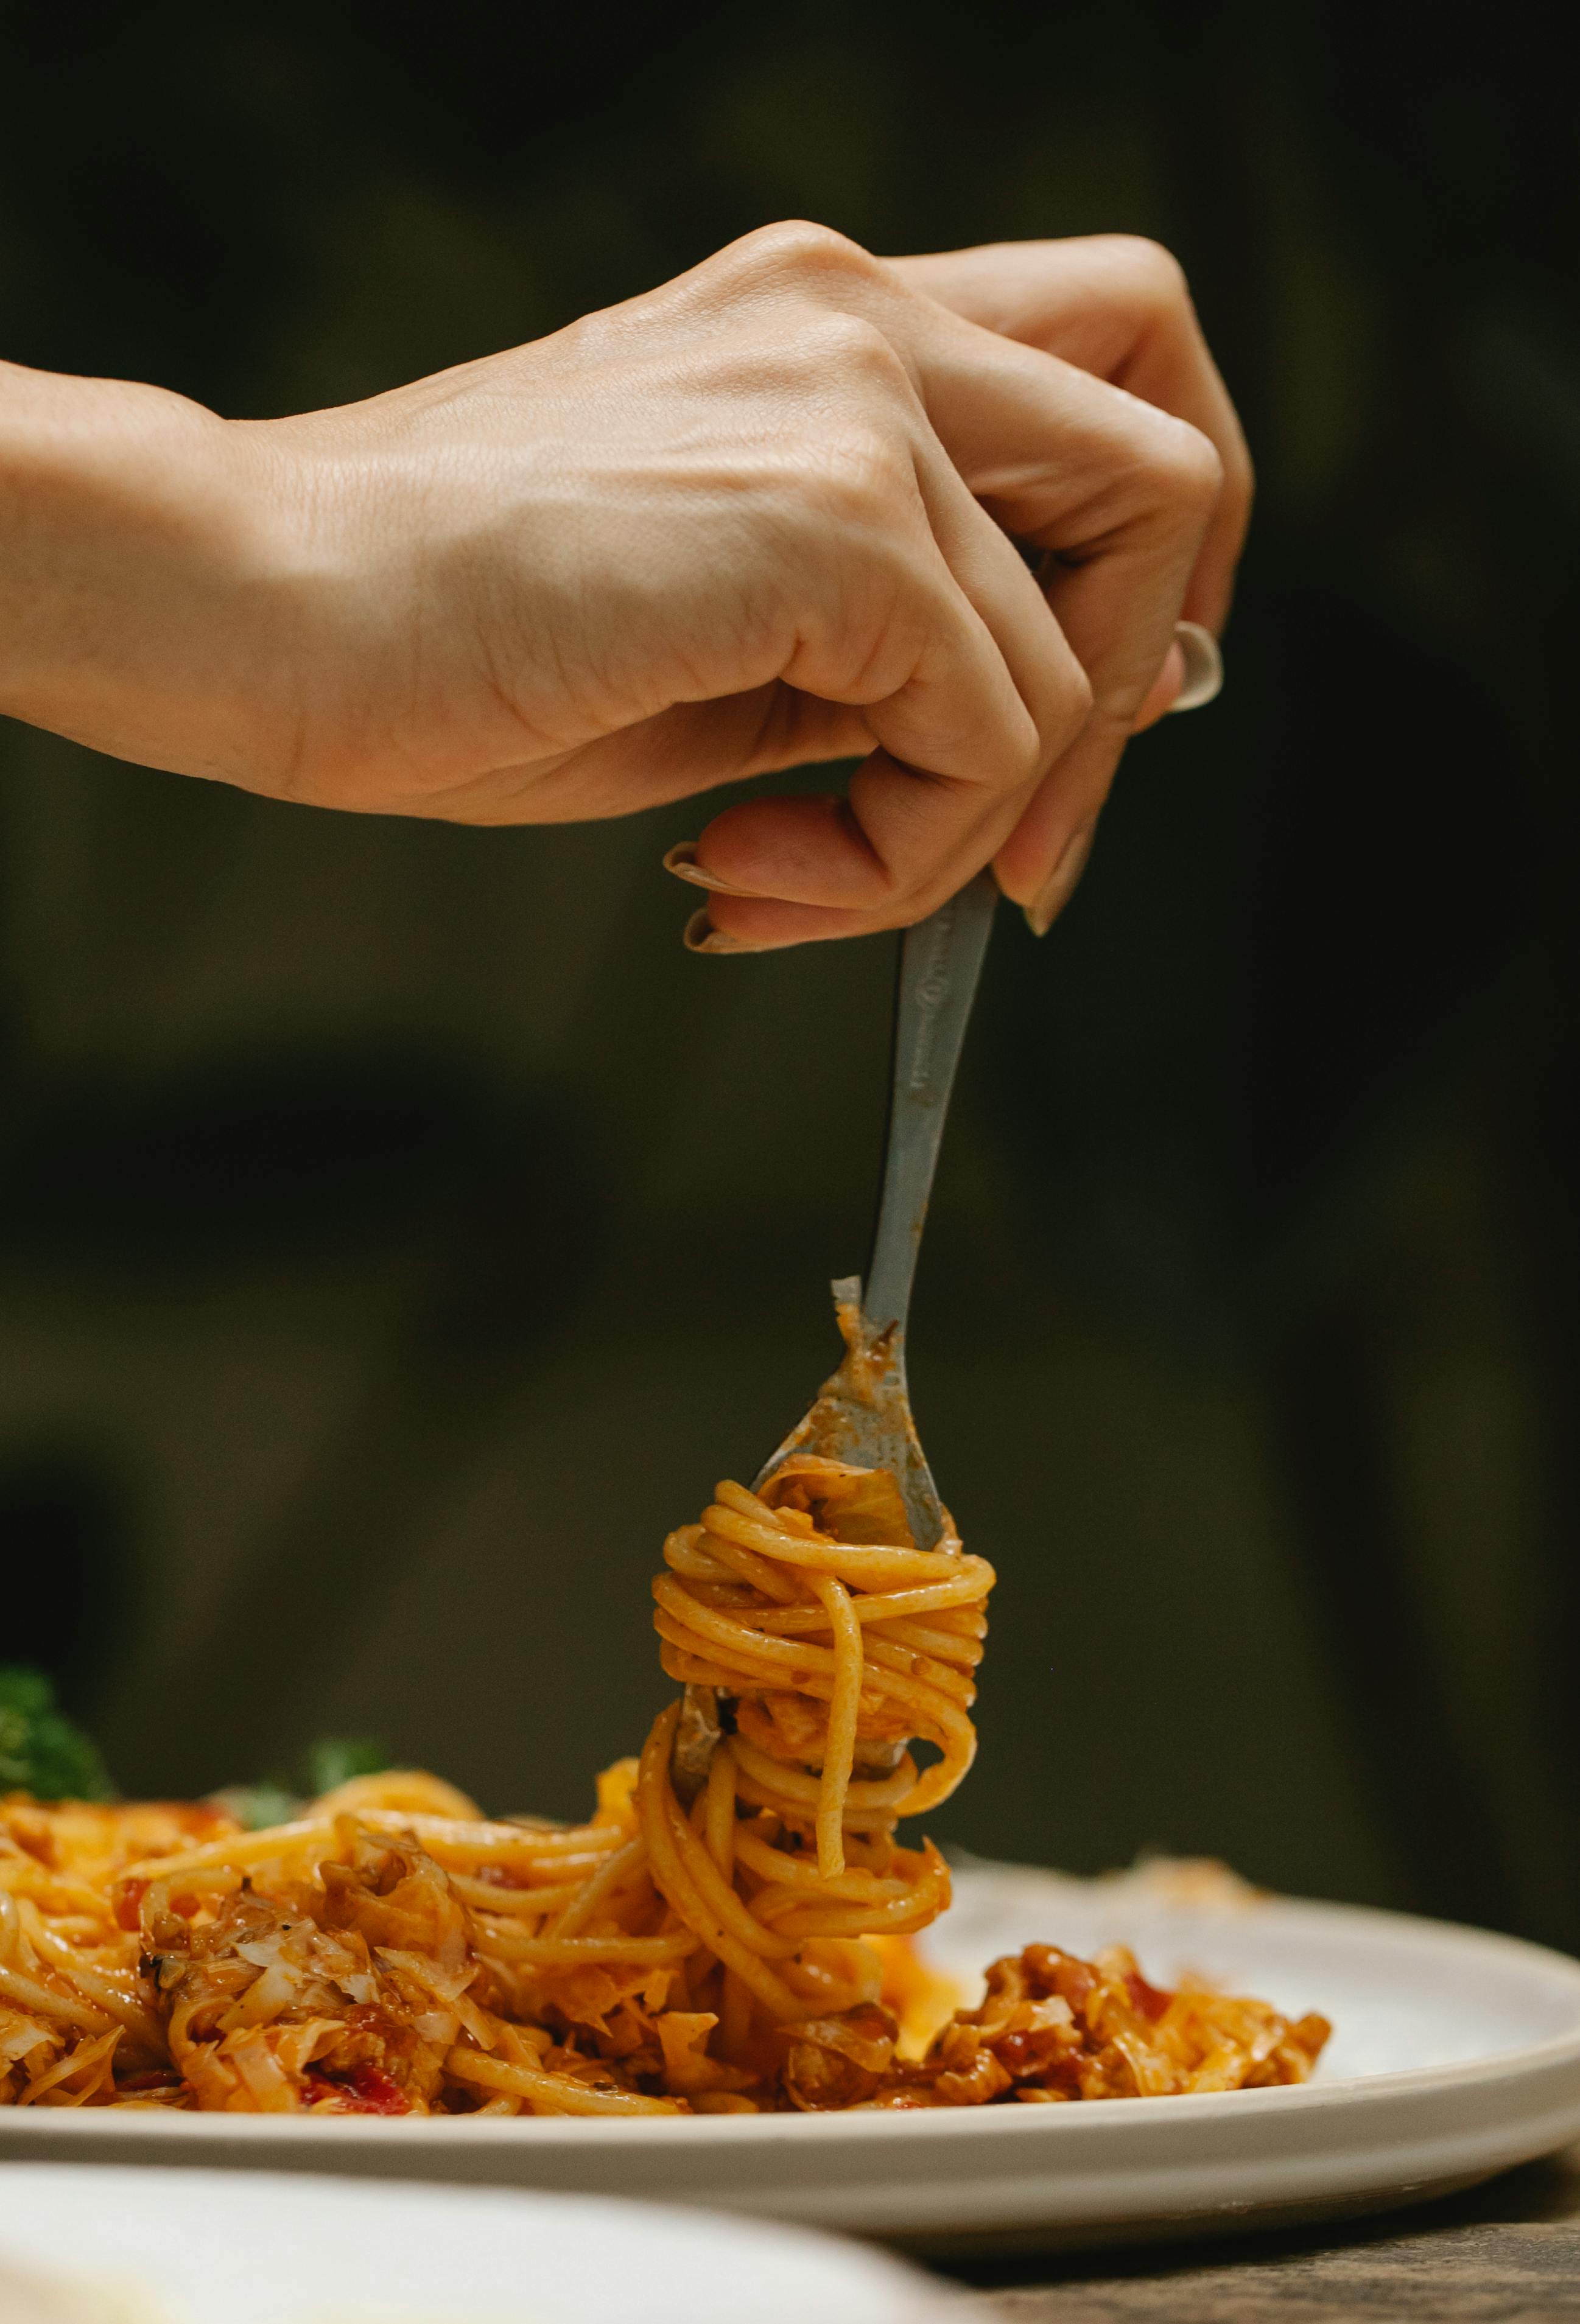 Woman rolling spaghetti on fork | Source: Pexels